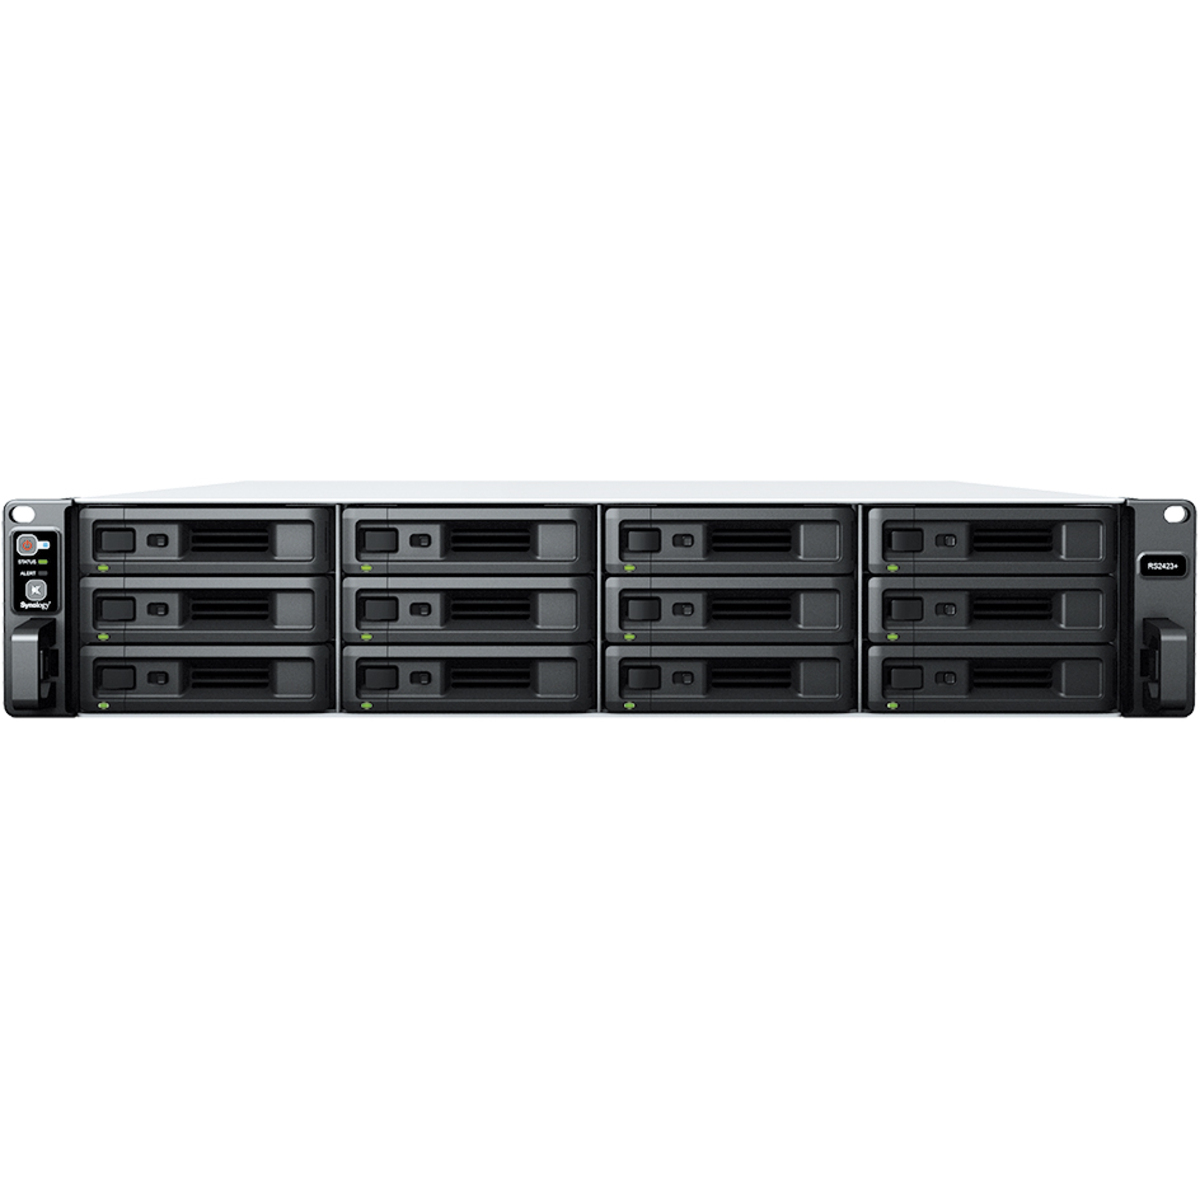 Synology RackStation RS2423+ 24tb 12-Bay RackMount Multimedia / Power User / Business NAS - Network Attached Storage Device 12x2tb Crucial MX500 CT2000MX500SSD1 2.5 560/510MB/s SATA 6Gb/s SSD CONSUMER Class Drives Installed - Burn-In Tested RackStation RS2423+